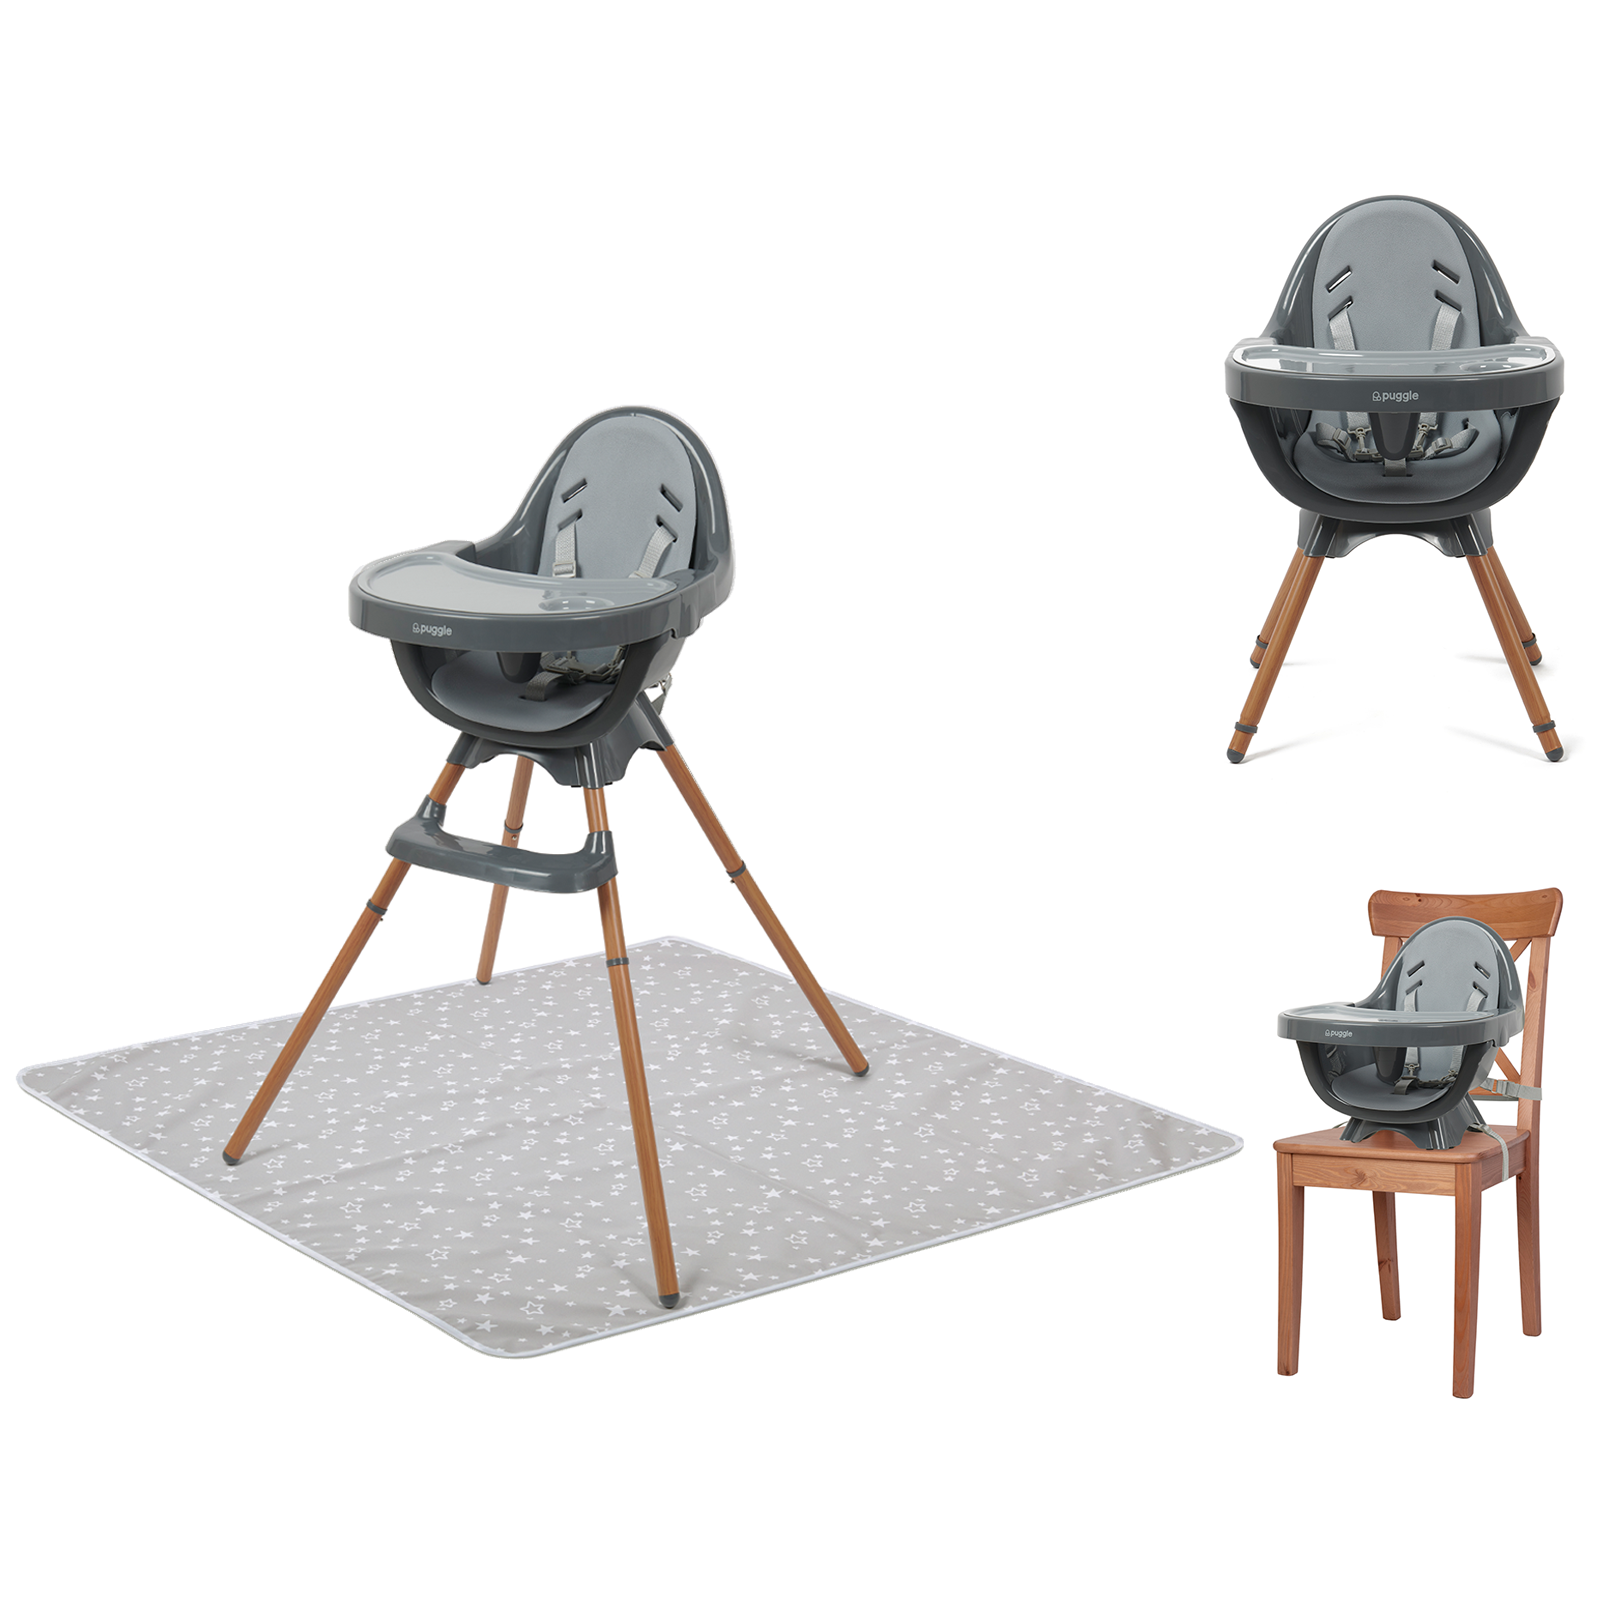 Puggle Munch Crunch 3in1 High/Low Chair & Booster Seat Special Edition with Splash Mat - Graphite Grey